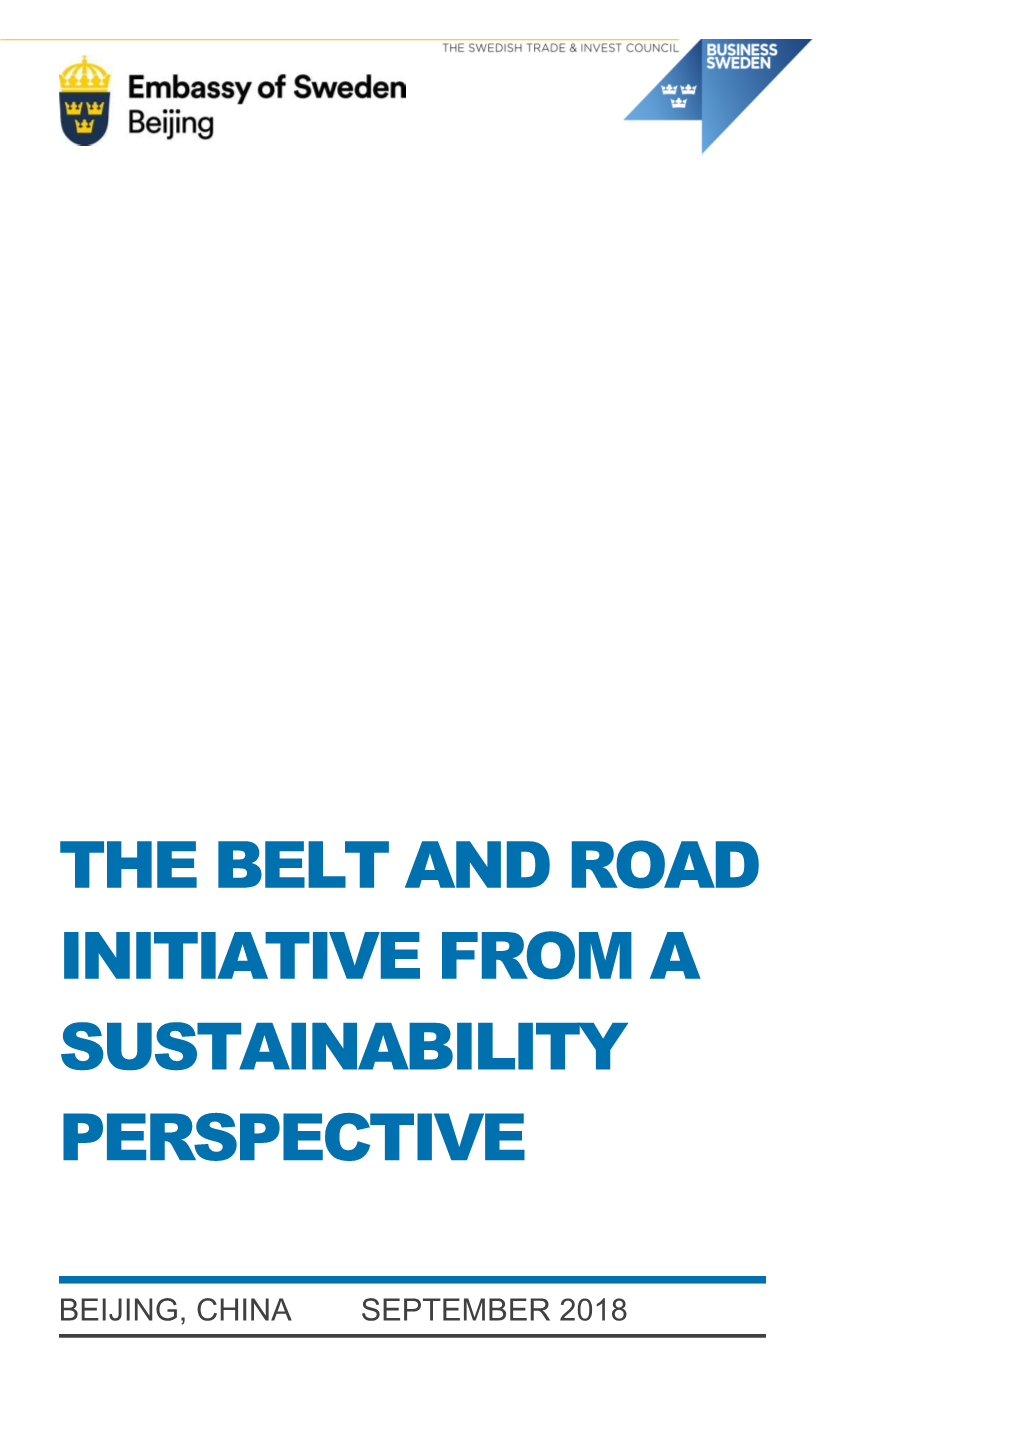 The Belt and Road Initiative from a Sustainability Perspective